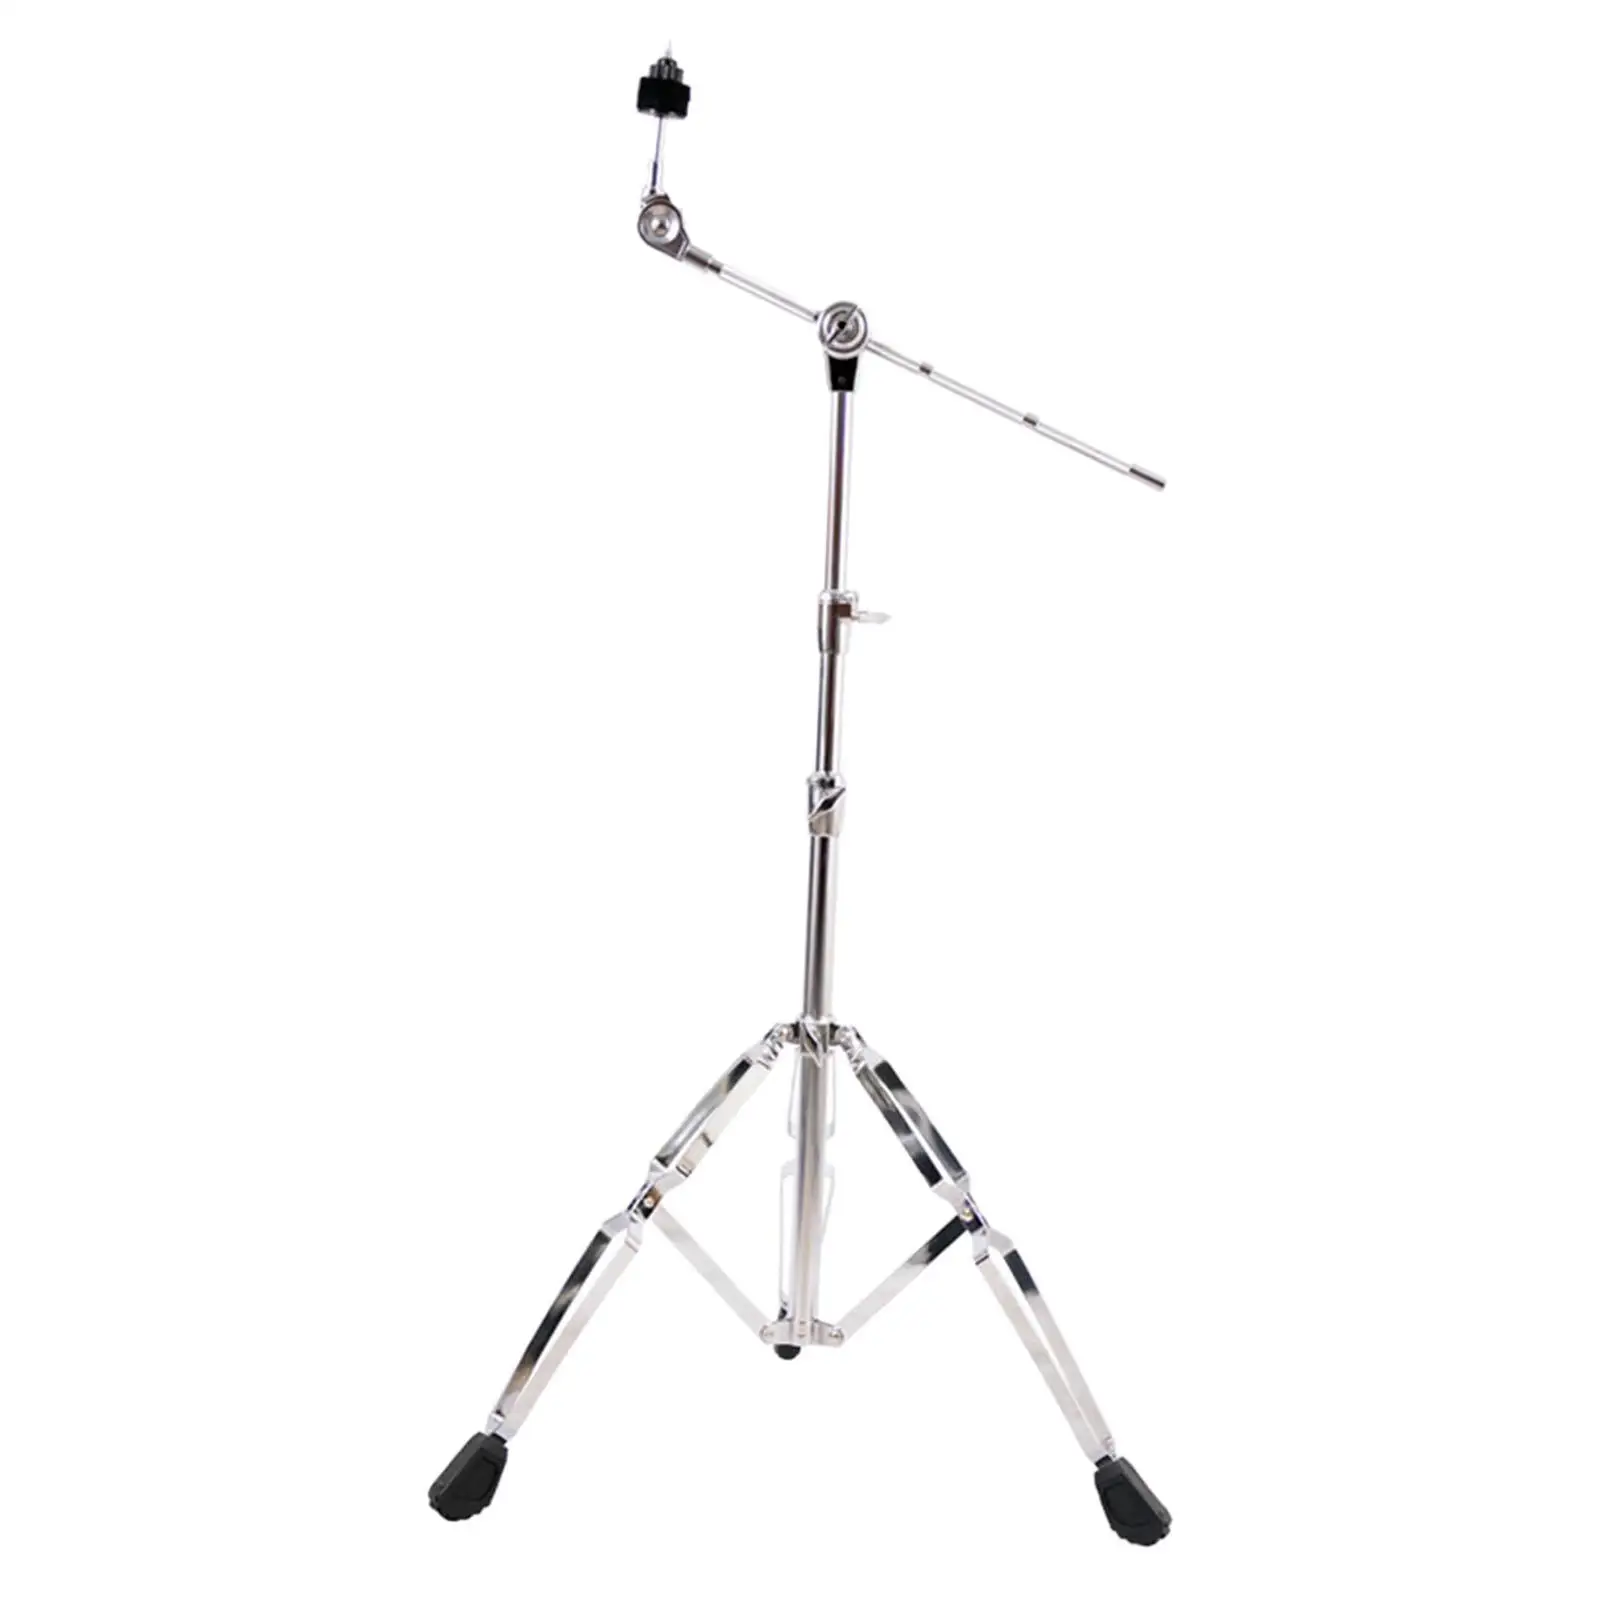 Percussion Floor Cymbal Stand Holder Adjustable Foldable Heavy Weight Portable Triangular Stand Metal Tube Accessory Quick Grip